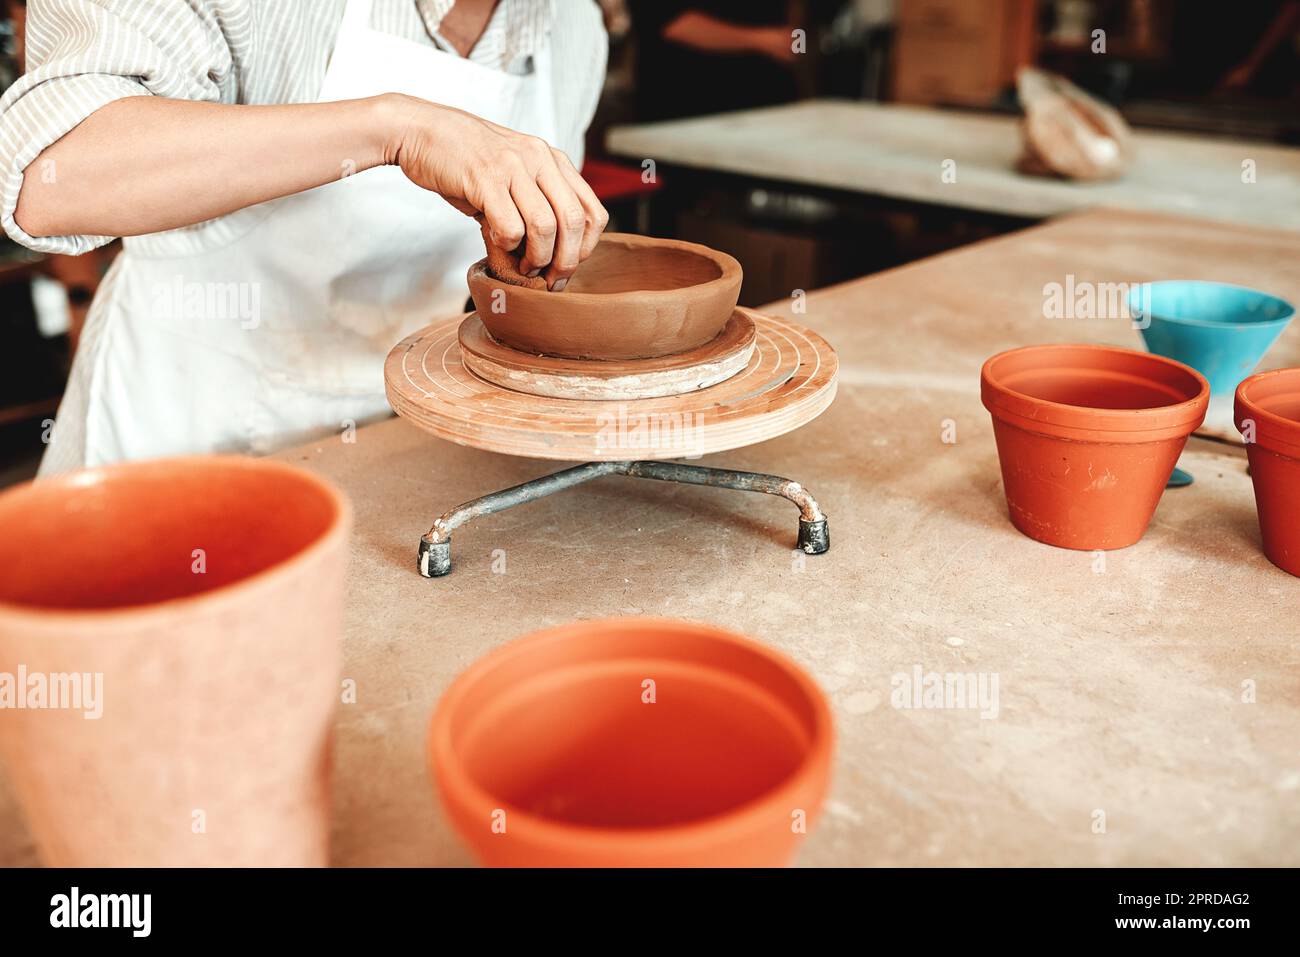 Its not just a bowl, its art. an unrecognizable woman shaping a clay pot in her workshop. Stock Photo